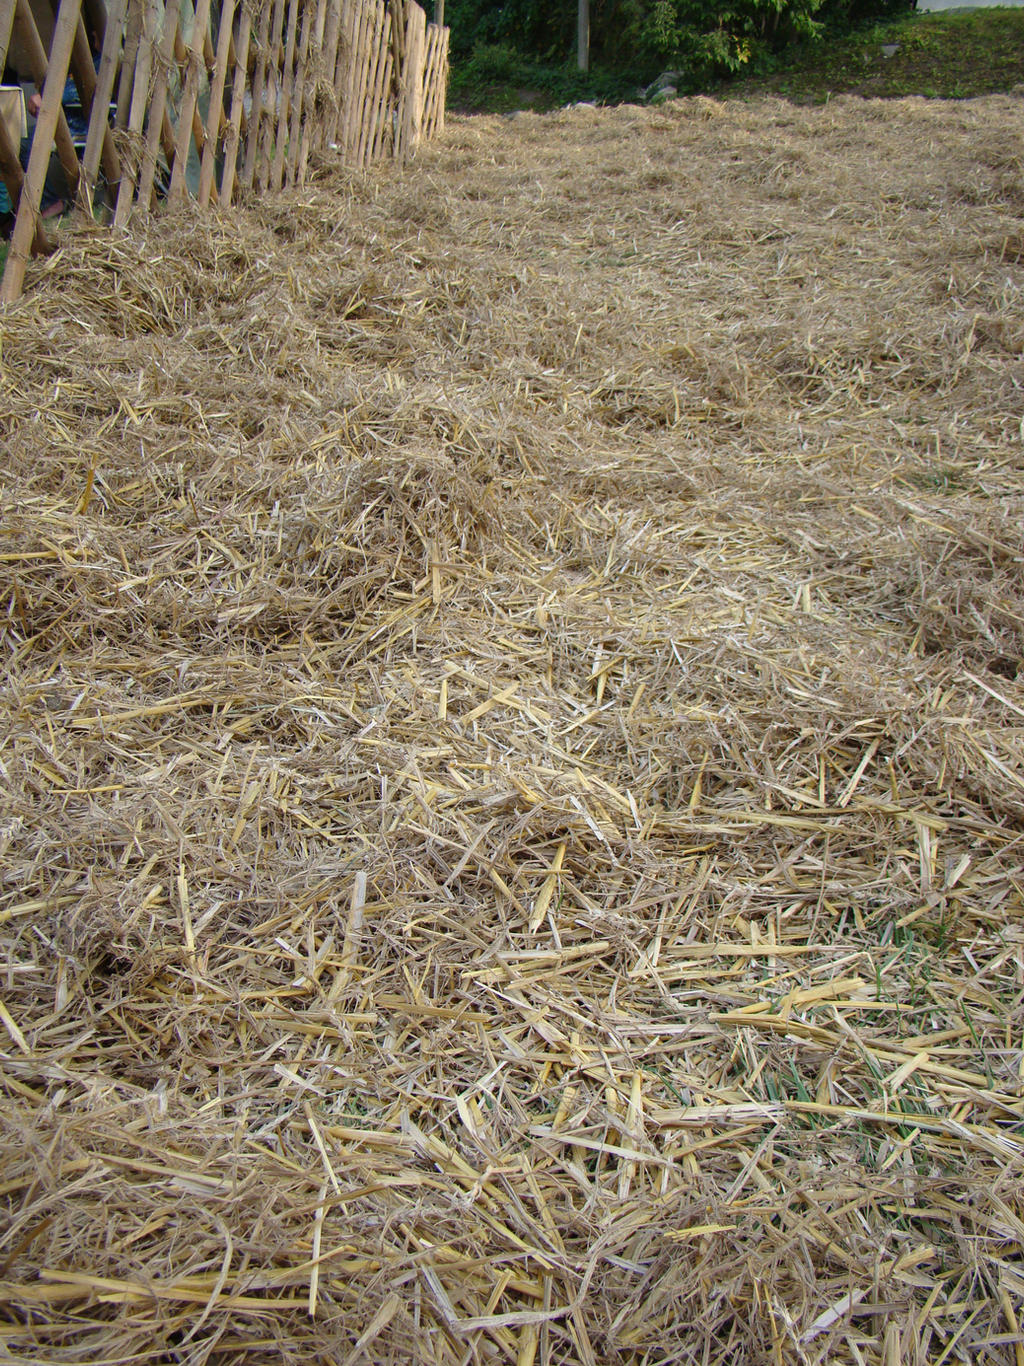 Straw and Hay